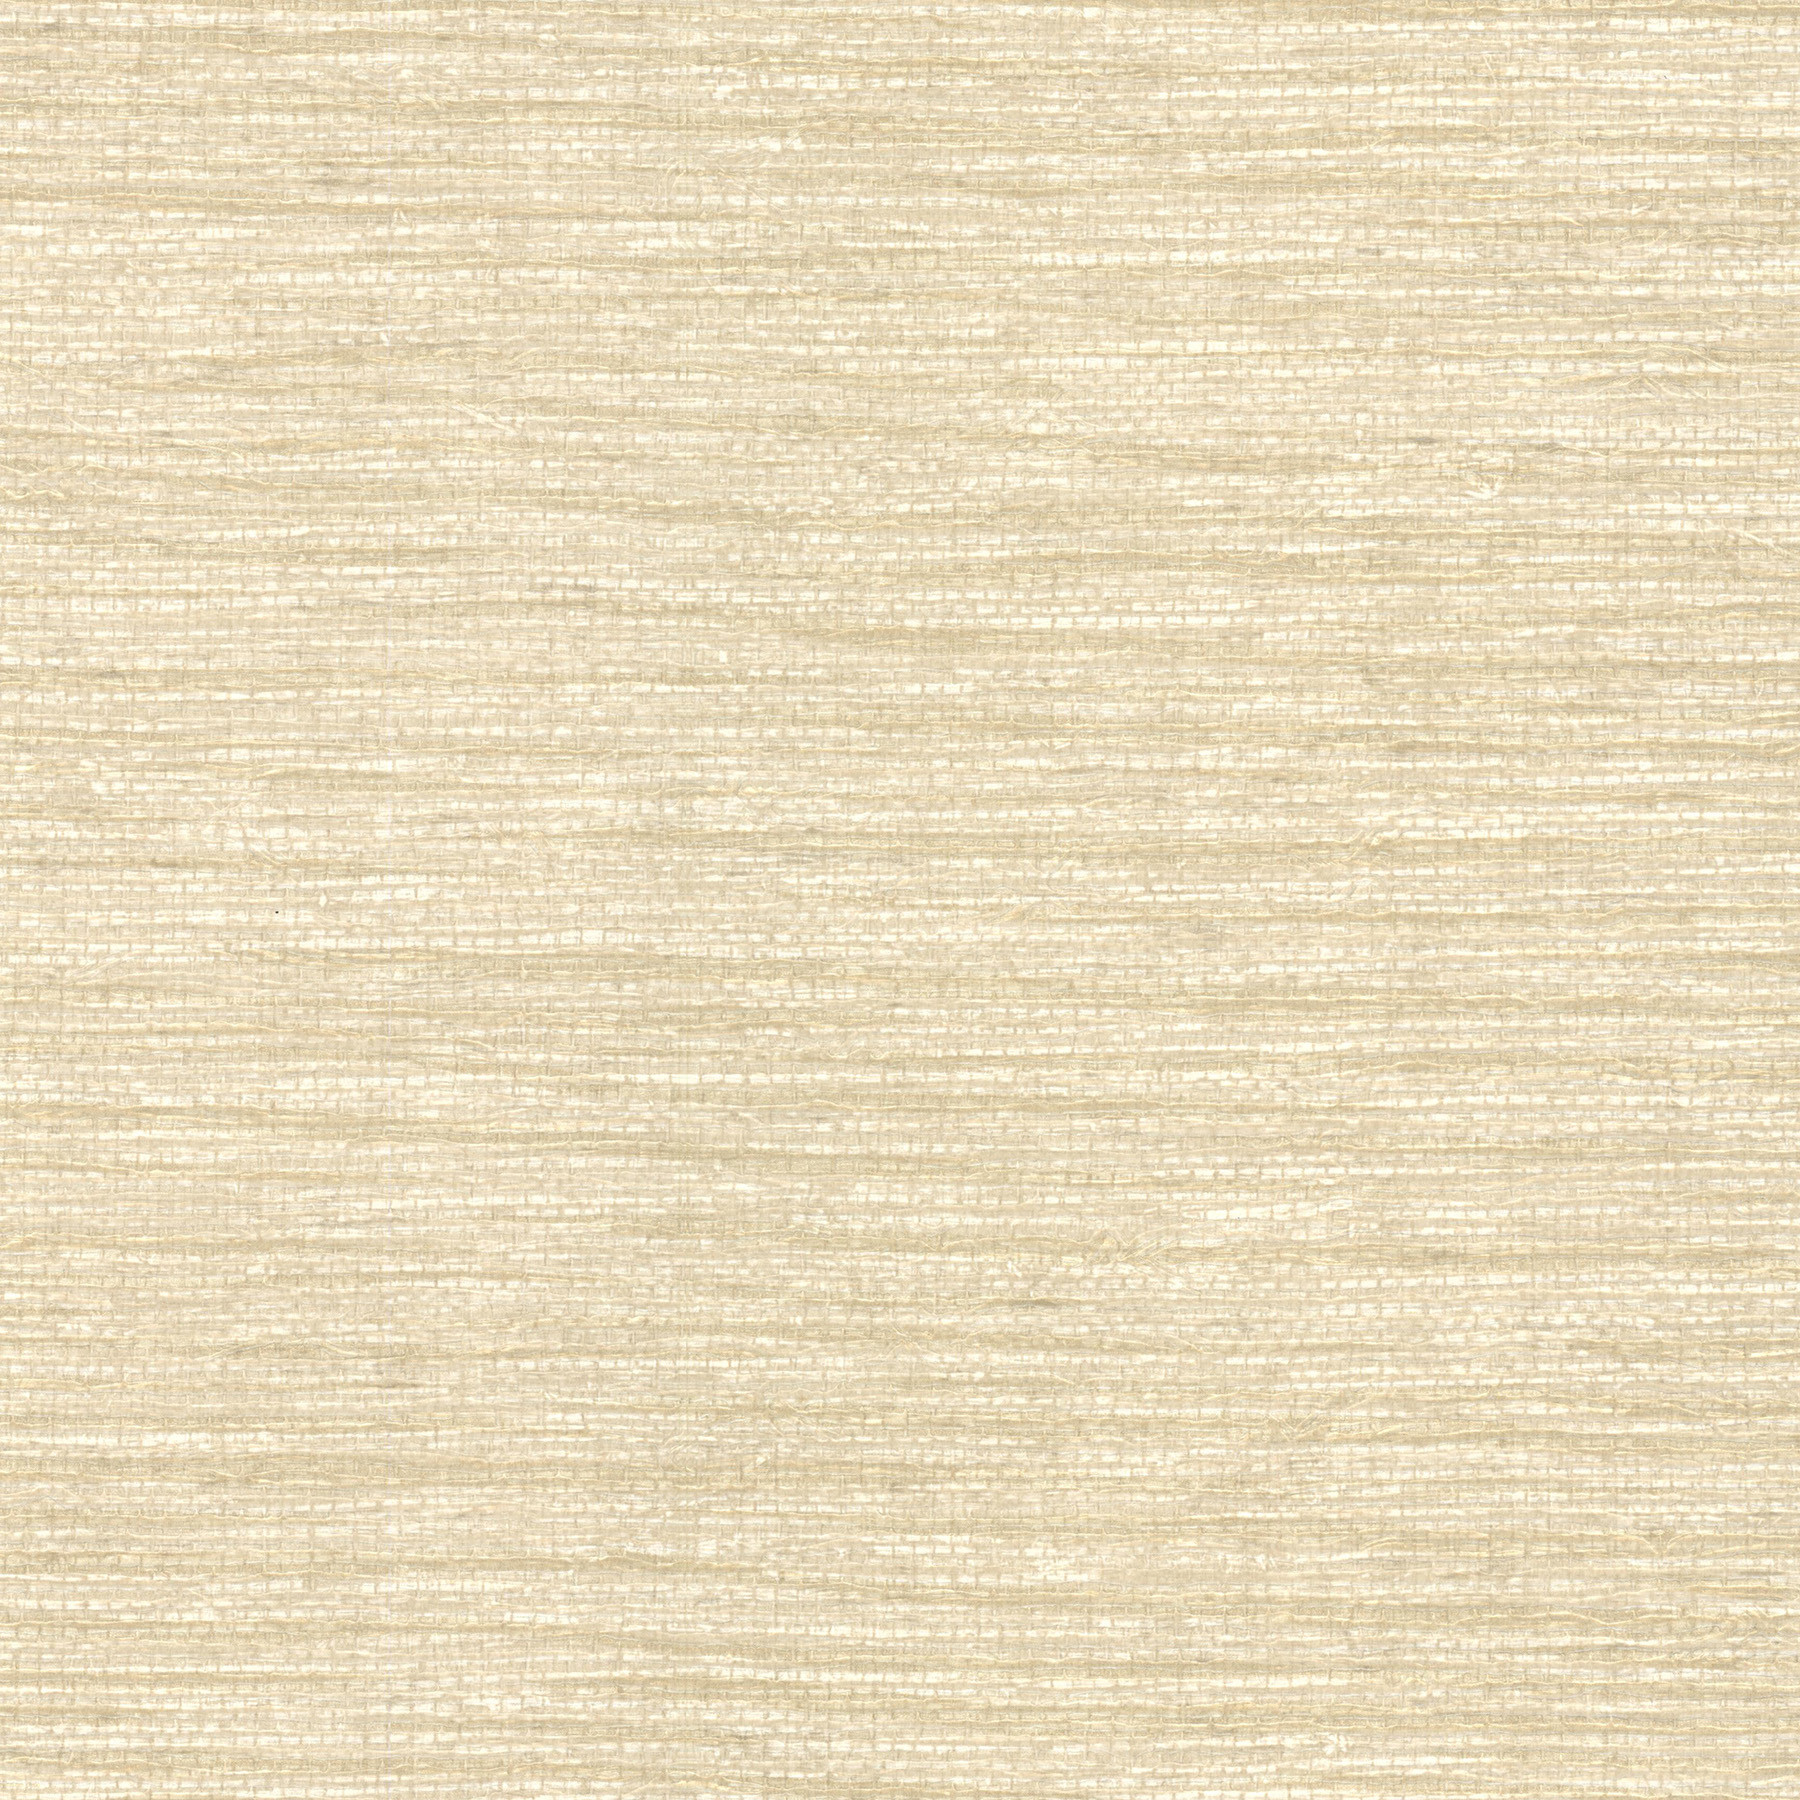 Iii Allen Scrubbable And Strippable Faux Grasscloth Wallpaper